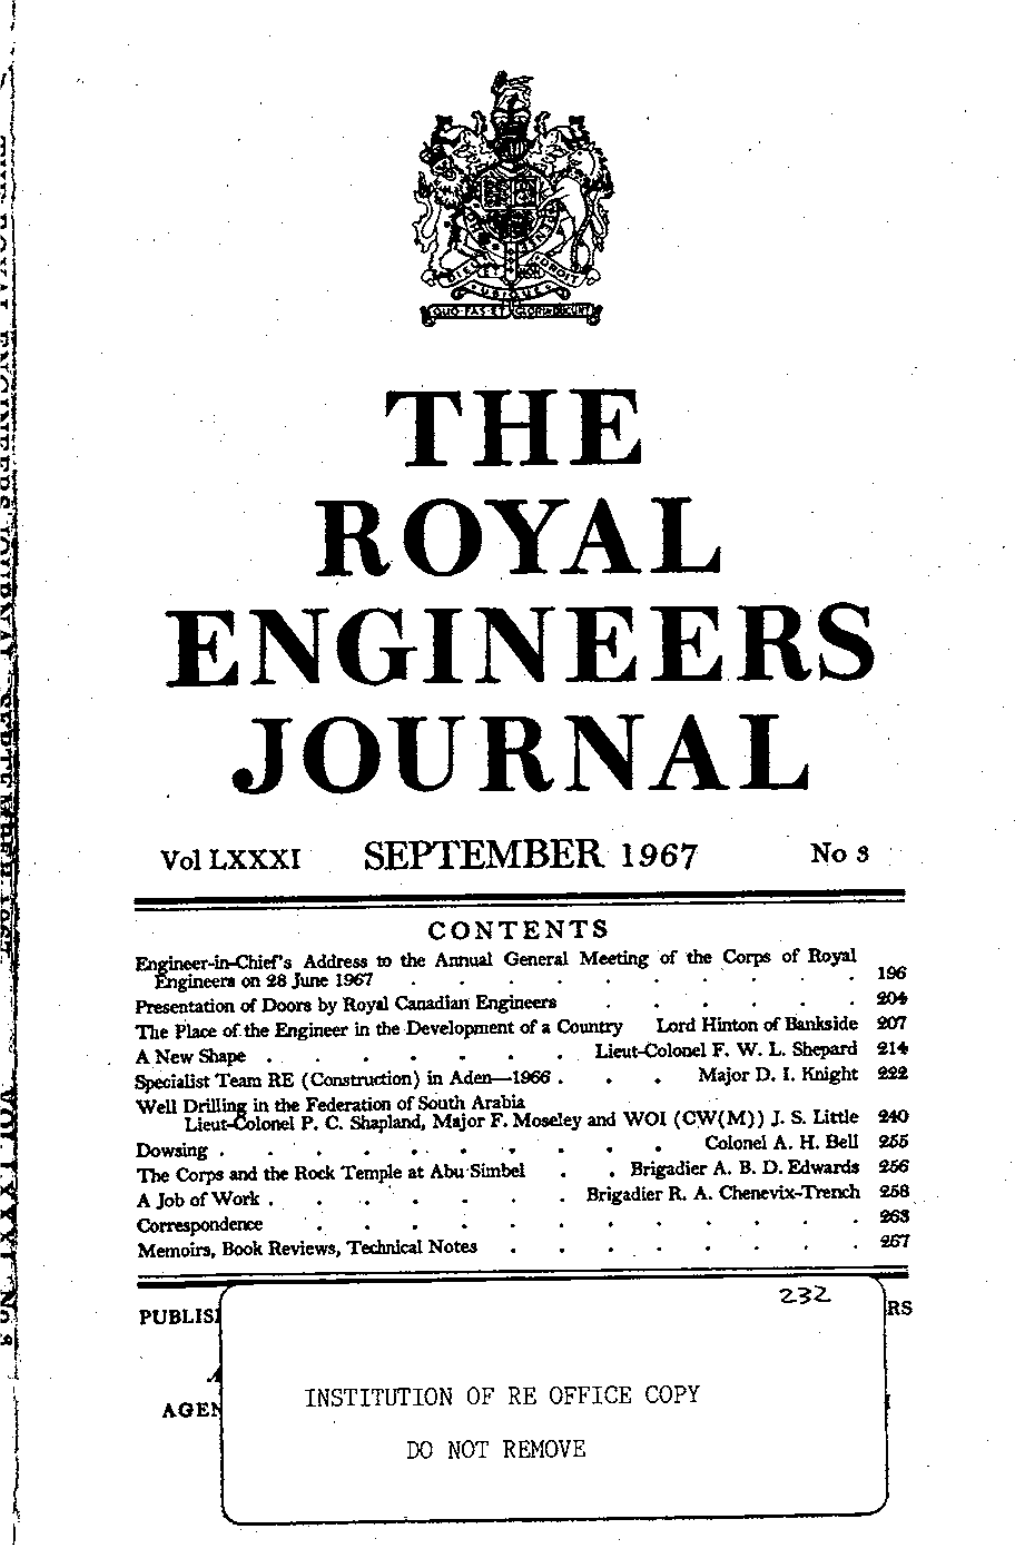 ROYAL ENGINEERS JOURNAL Vollxxxi SEPTEMBER 1967 Nos